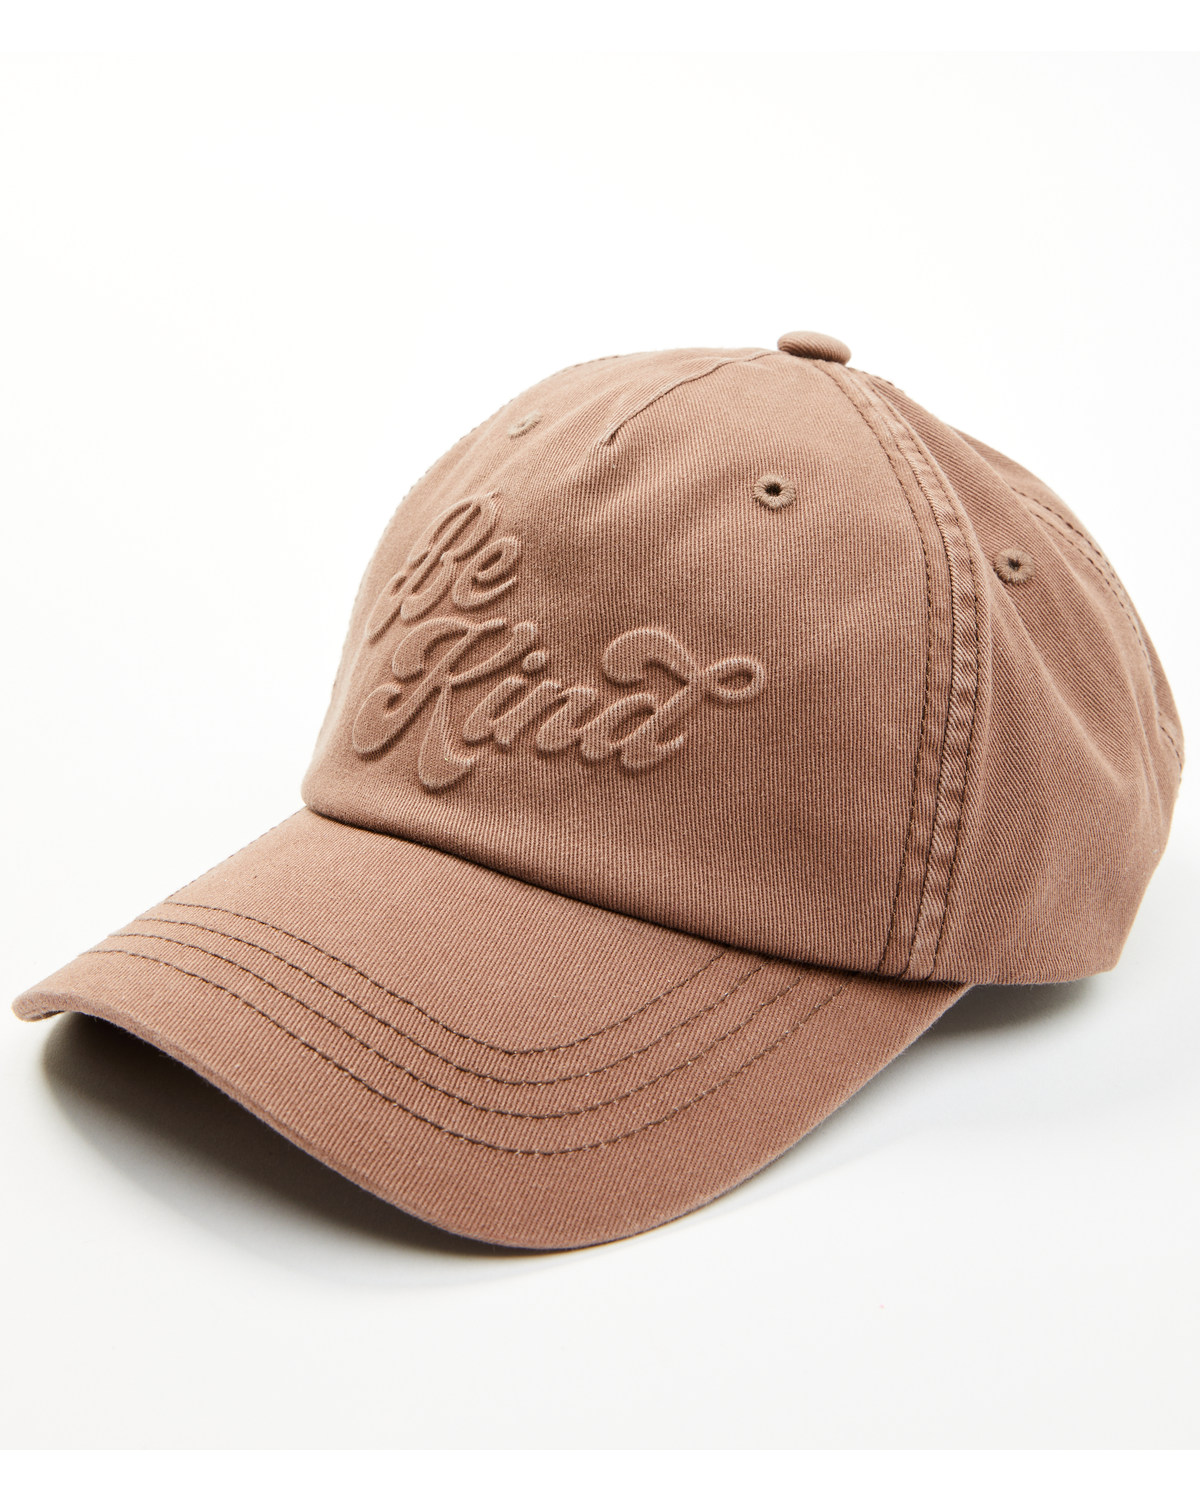 Cleo + Wolf Women's Be Kind Embossed Ball Cap